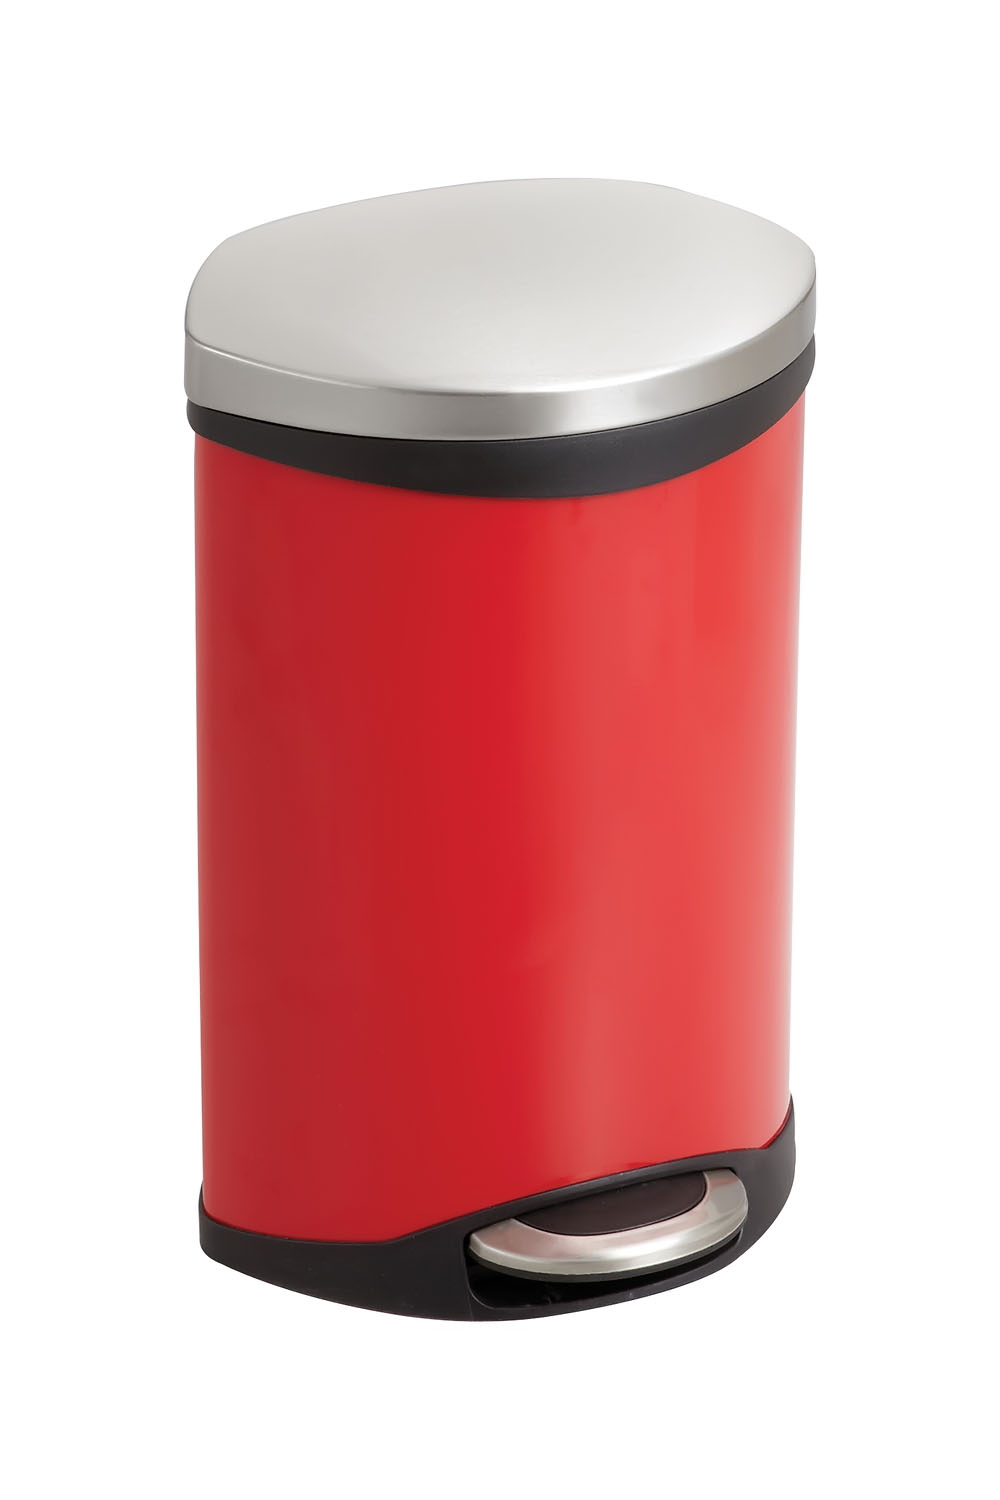 Safco Ellipse Hands Free Step-On Receptacle - 3 gal Capacity - 17" Height x 12" Width x 8.5" Depth - Steel, Plastic - Red - 1 Ea